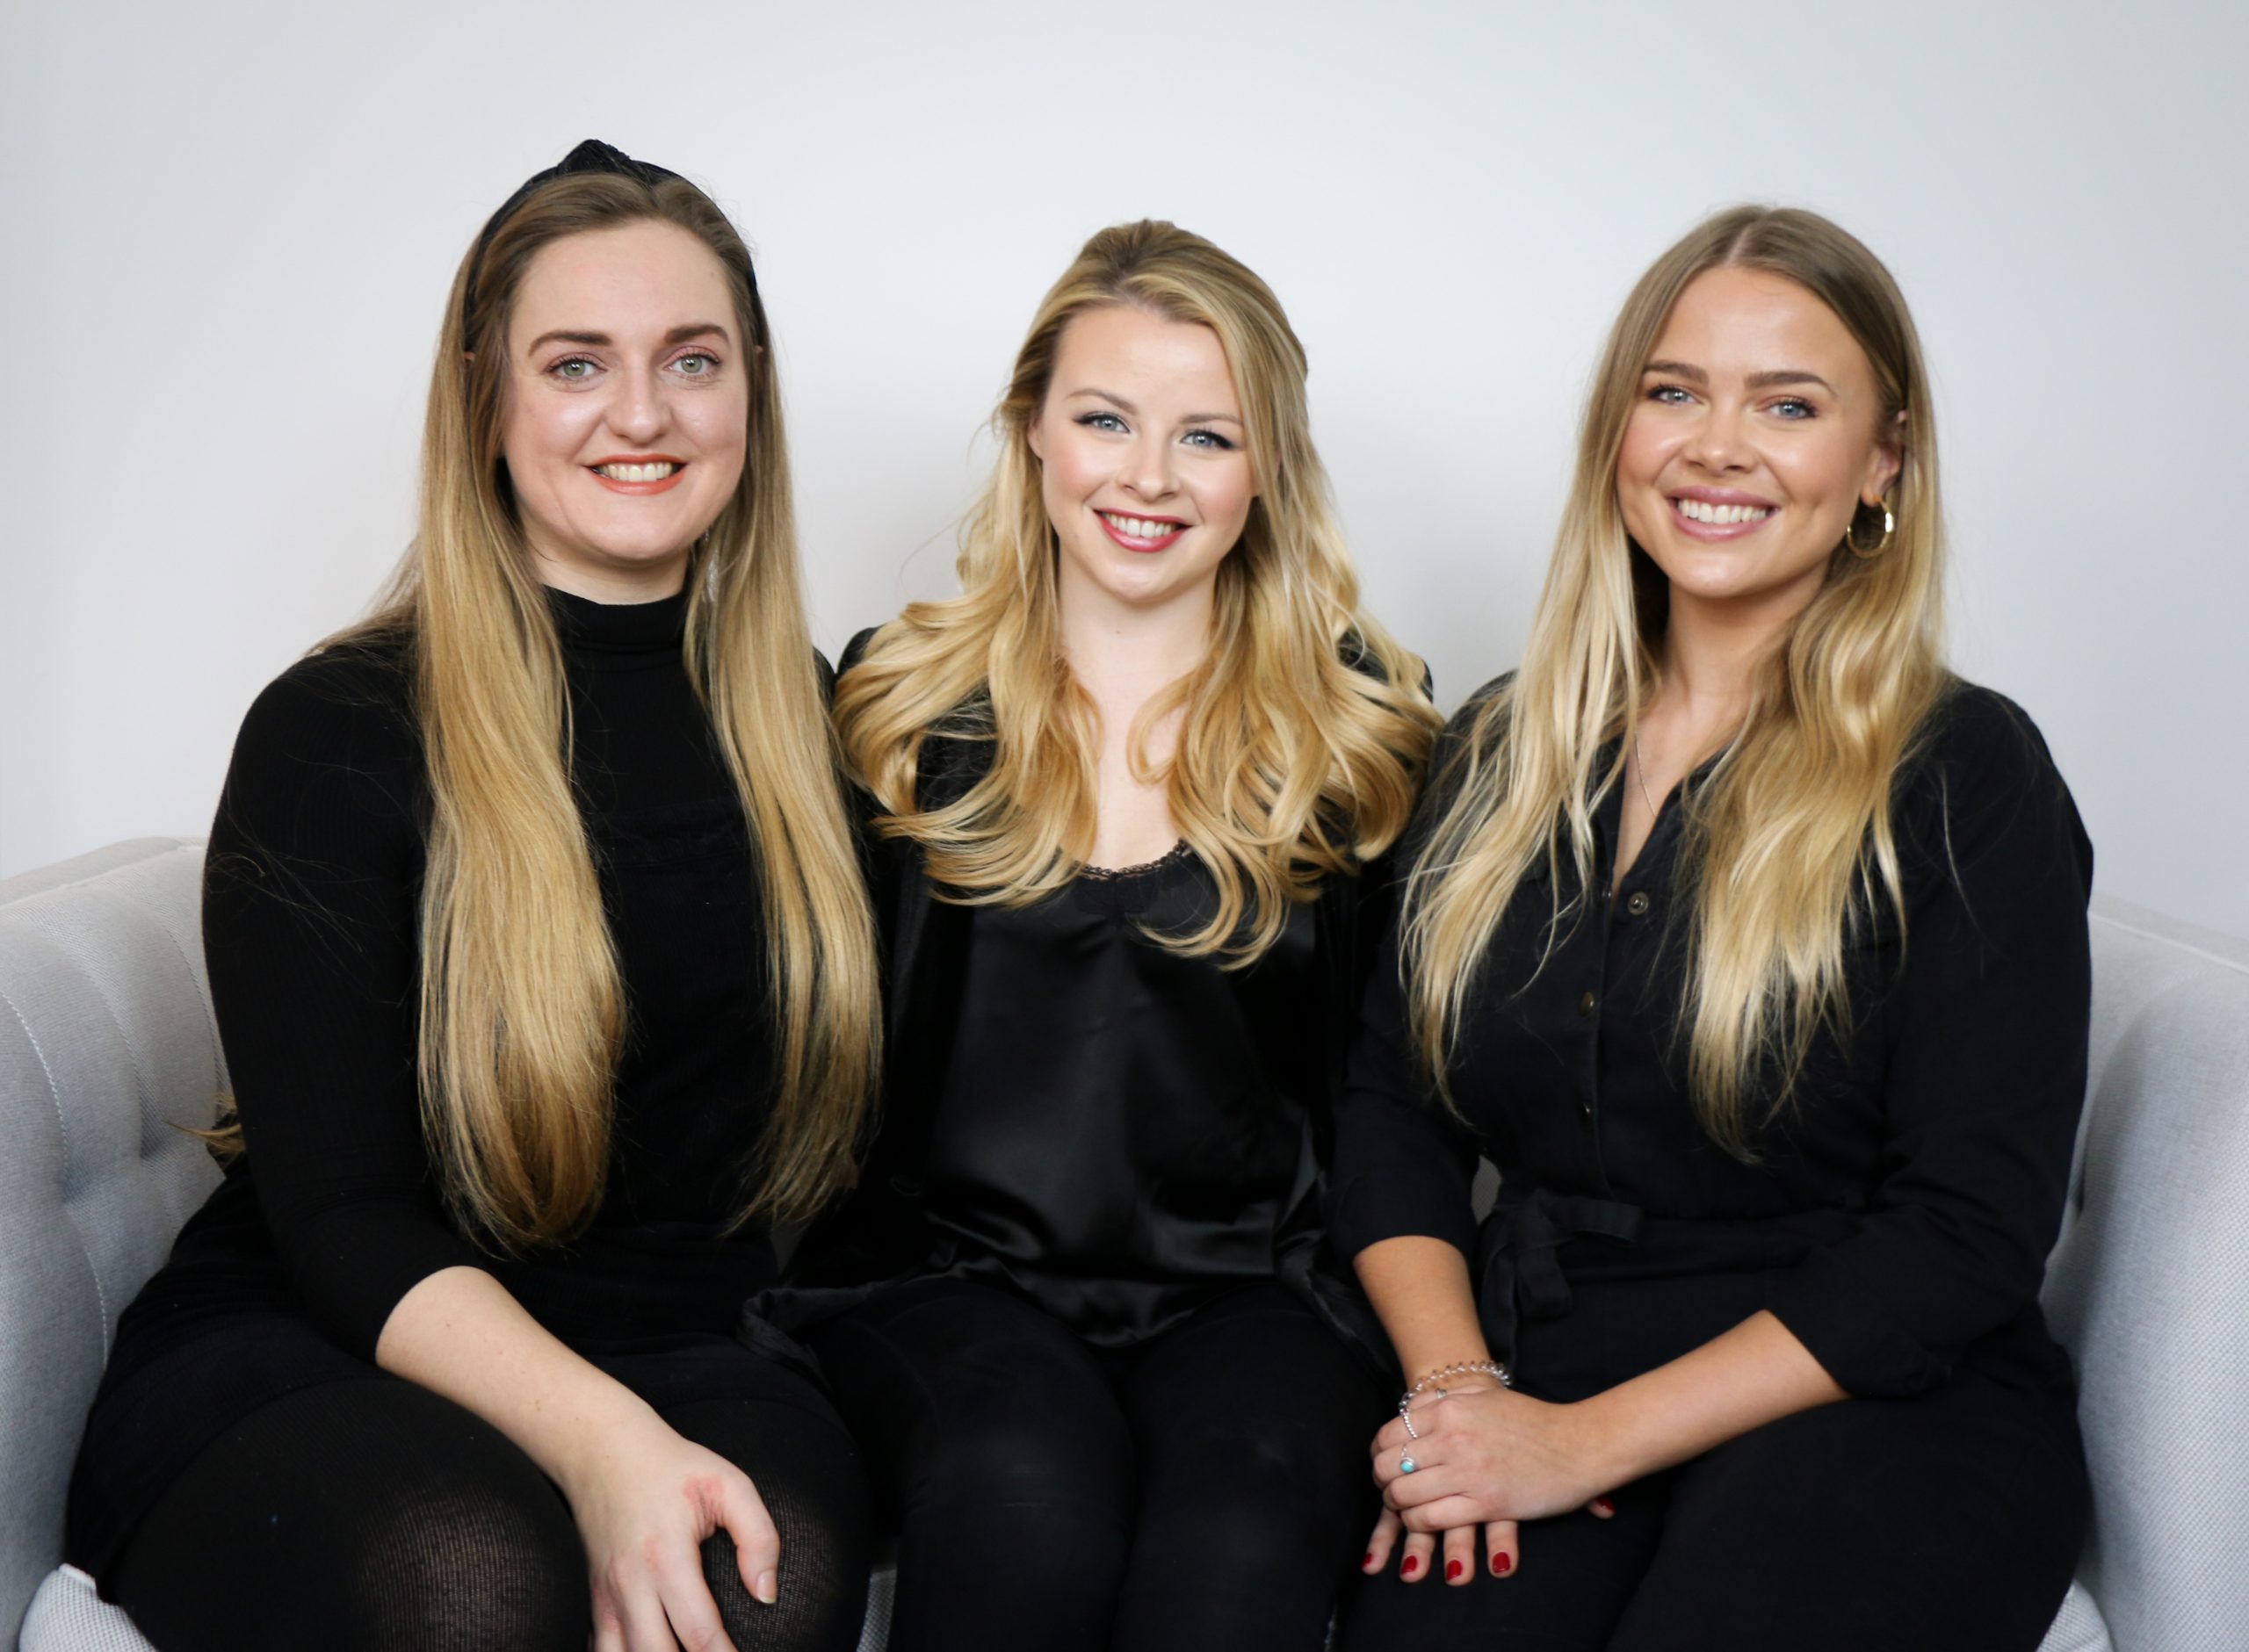 Three women in black clothing with long blonde hair sitting next to each other and smiling at the camera. They are the owners of Richmond performing arts school WestWay.